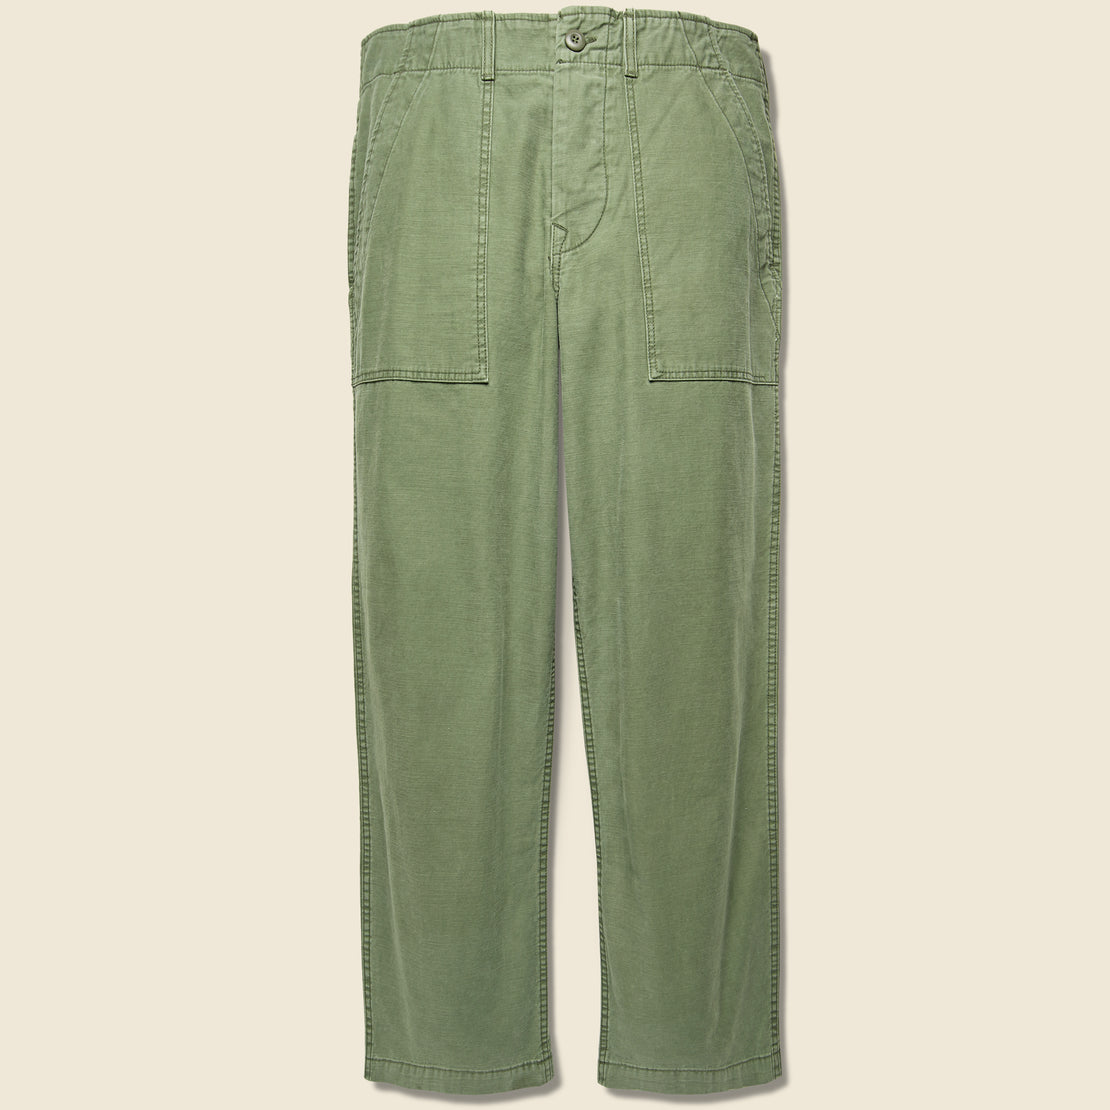 Imogene + Willie Oliver Military Trouser - Fatigue Green